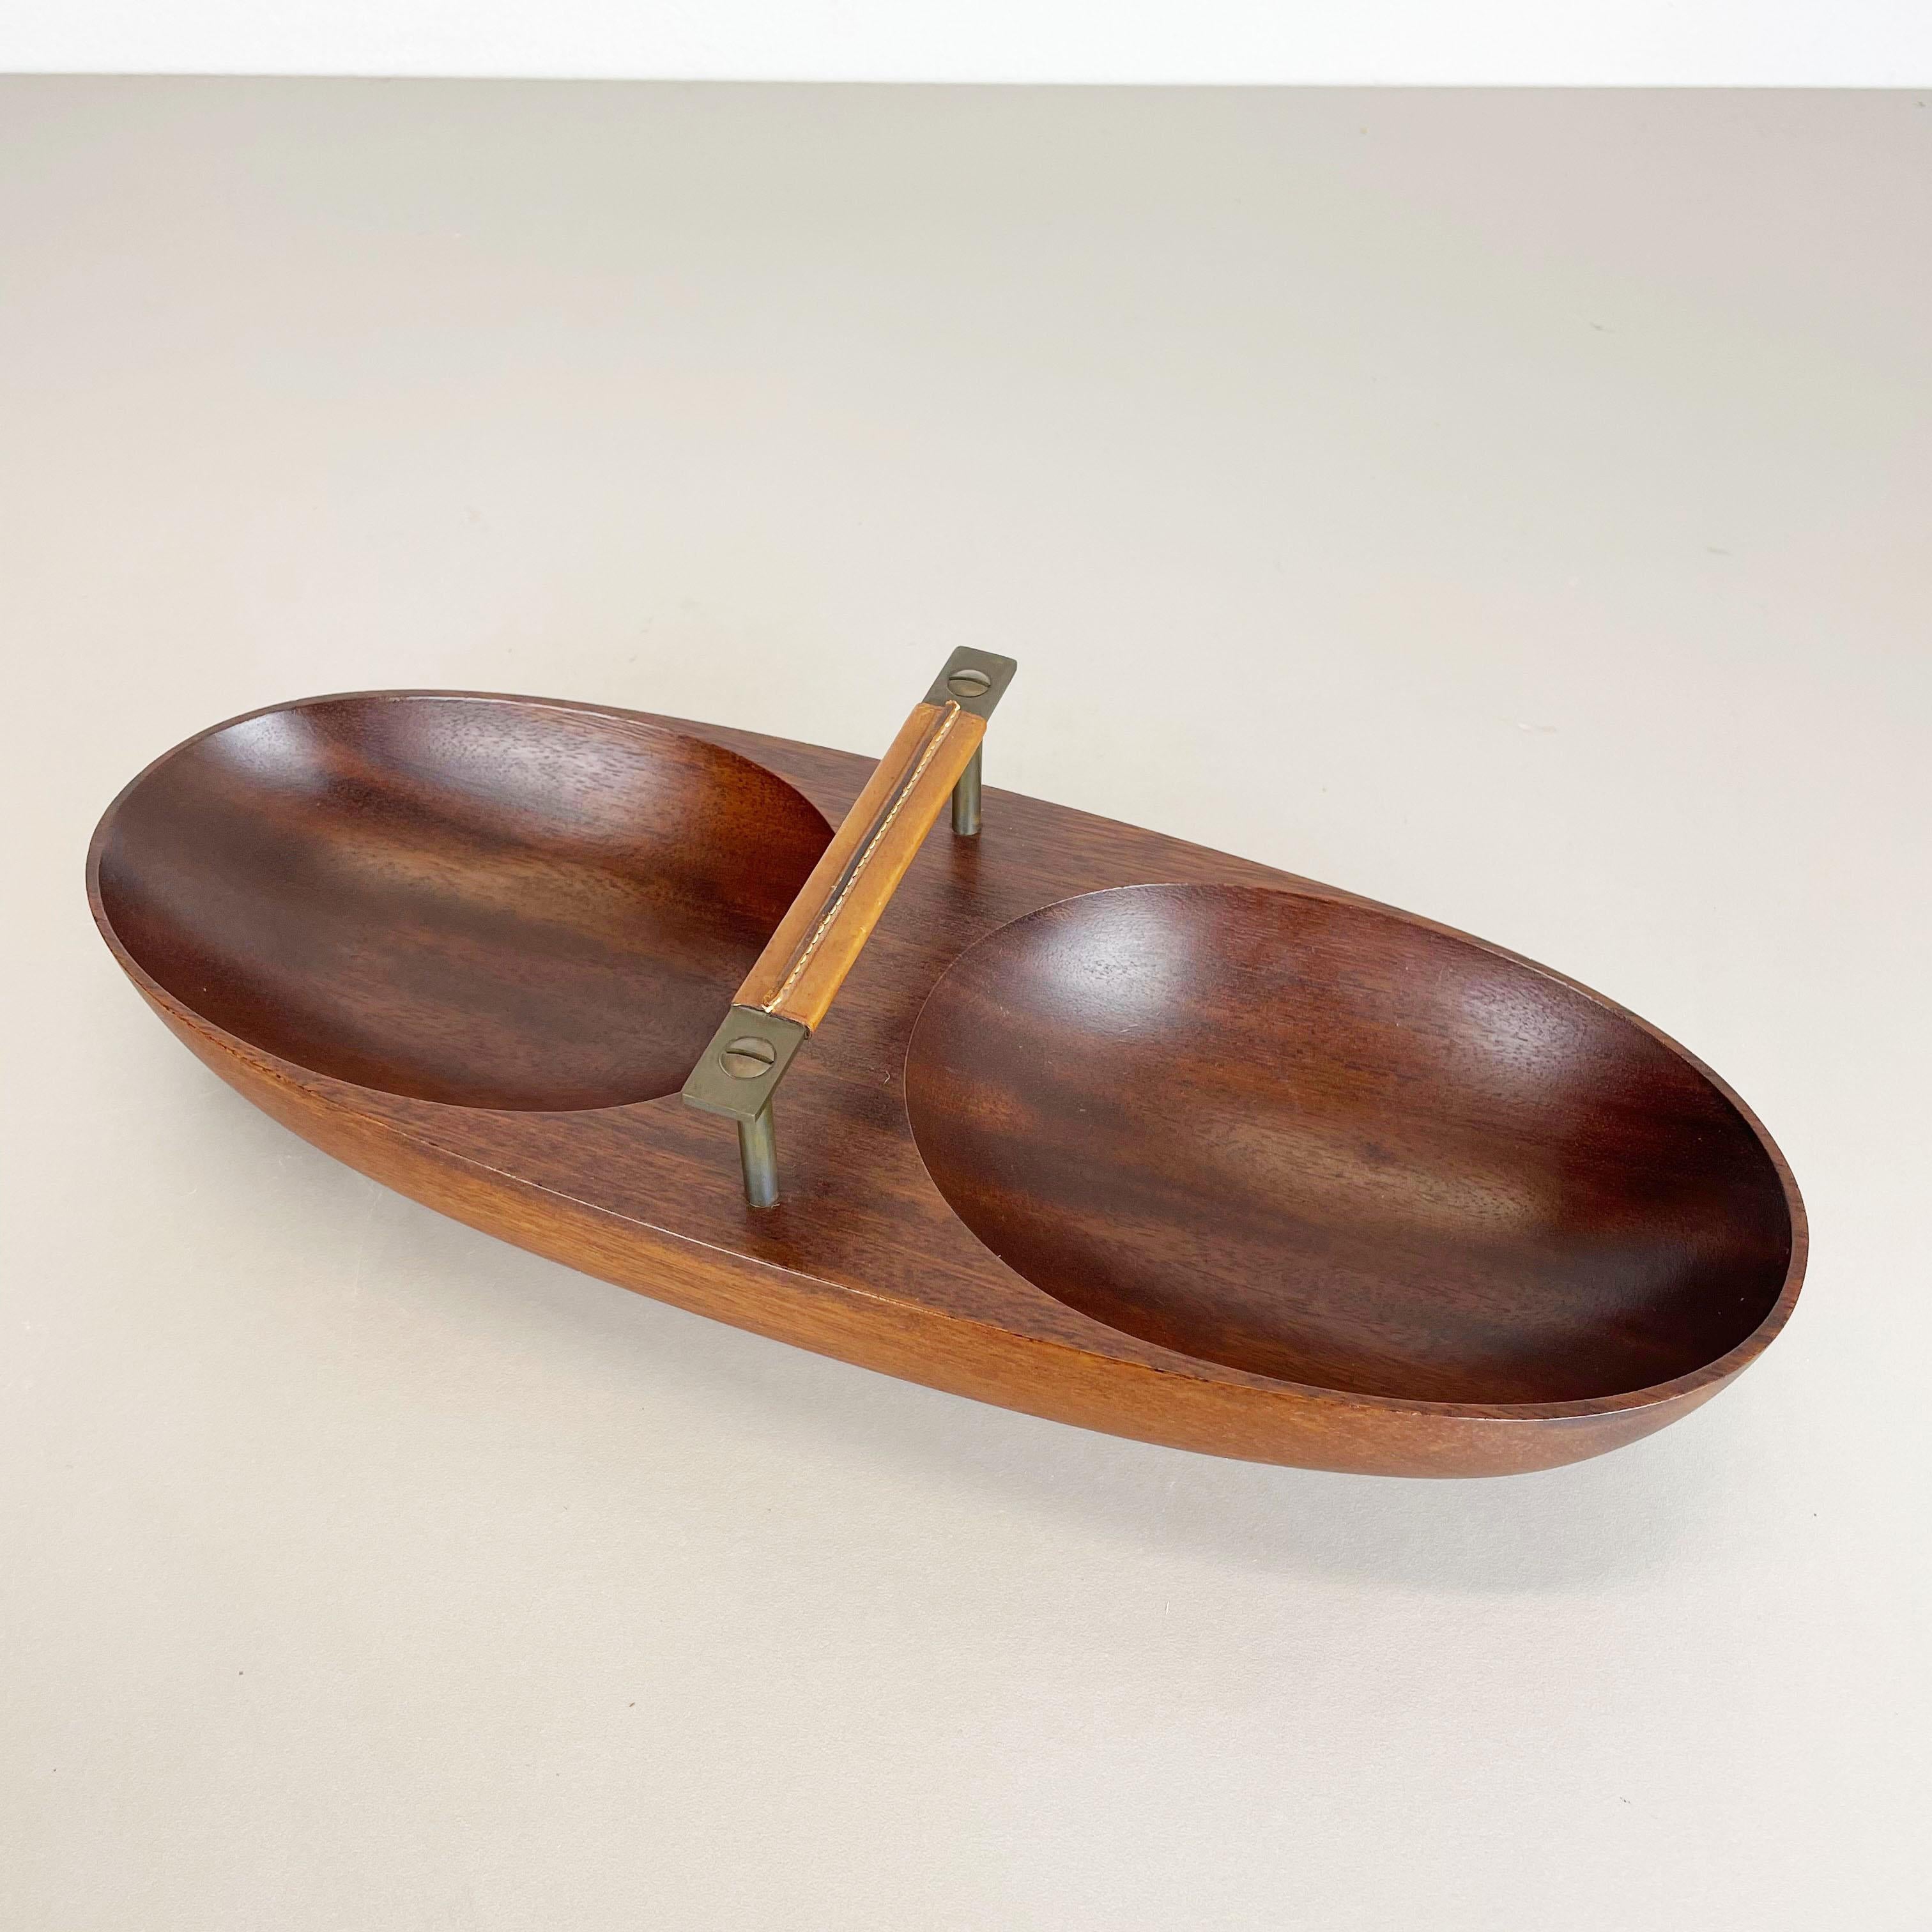 Mid-Century Modern Large Teak Bowl with Brass and Leather Handle by Carl Auböck, Austria, 1950s For Sale